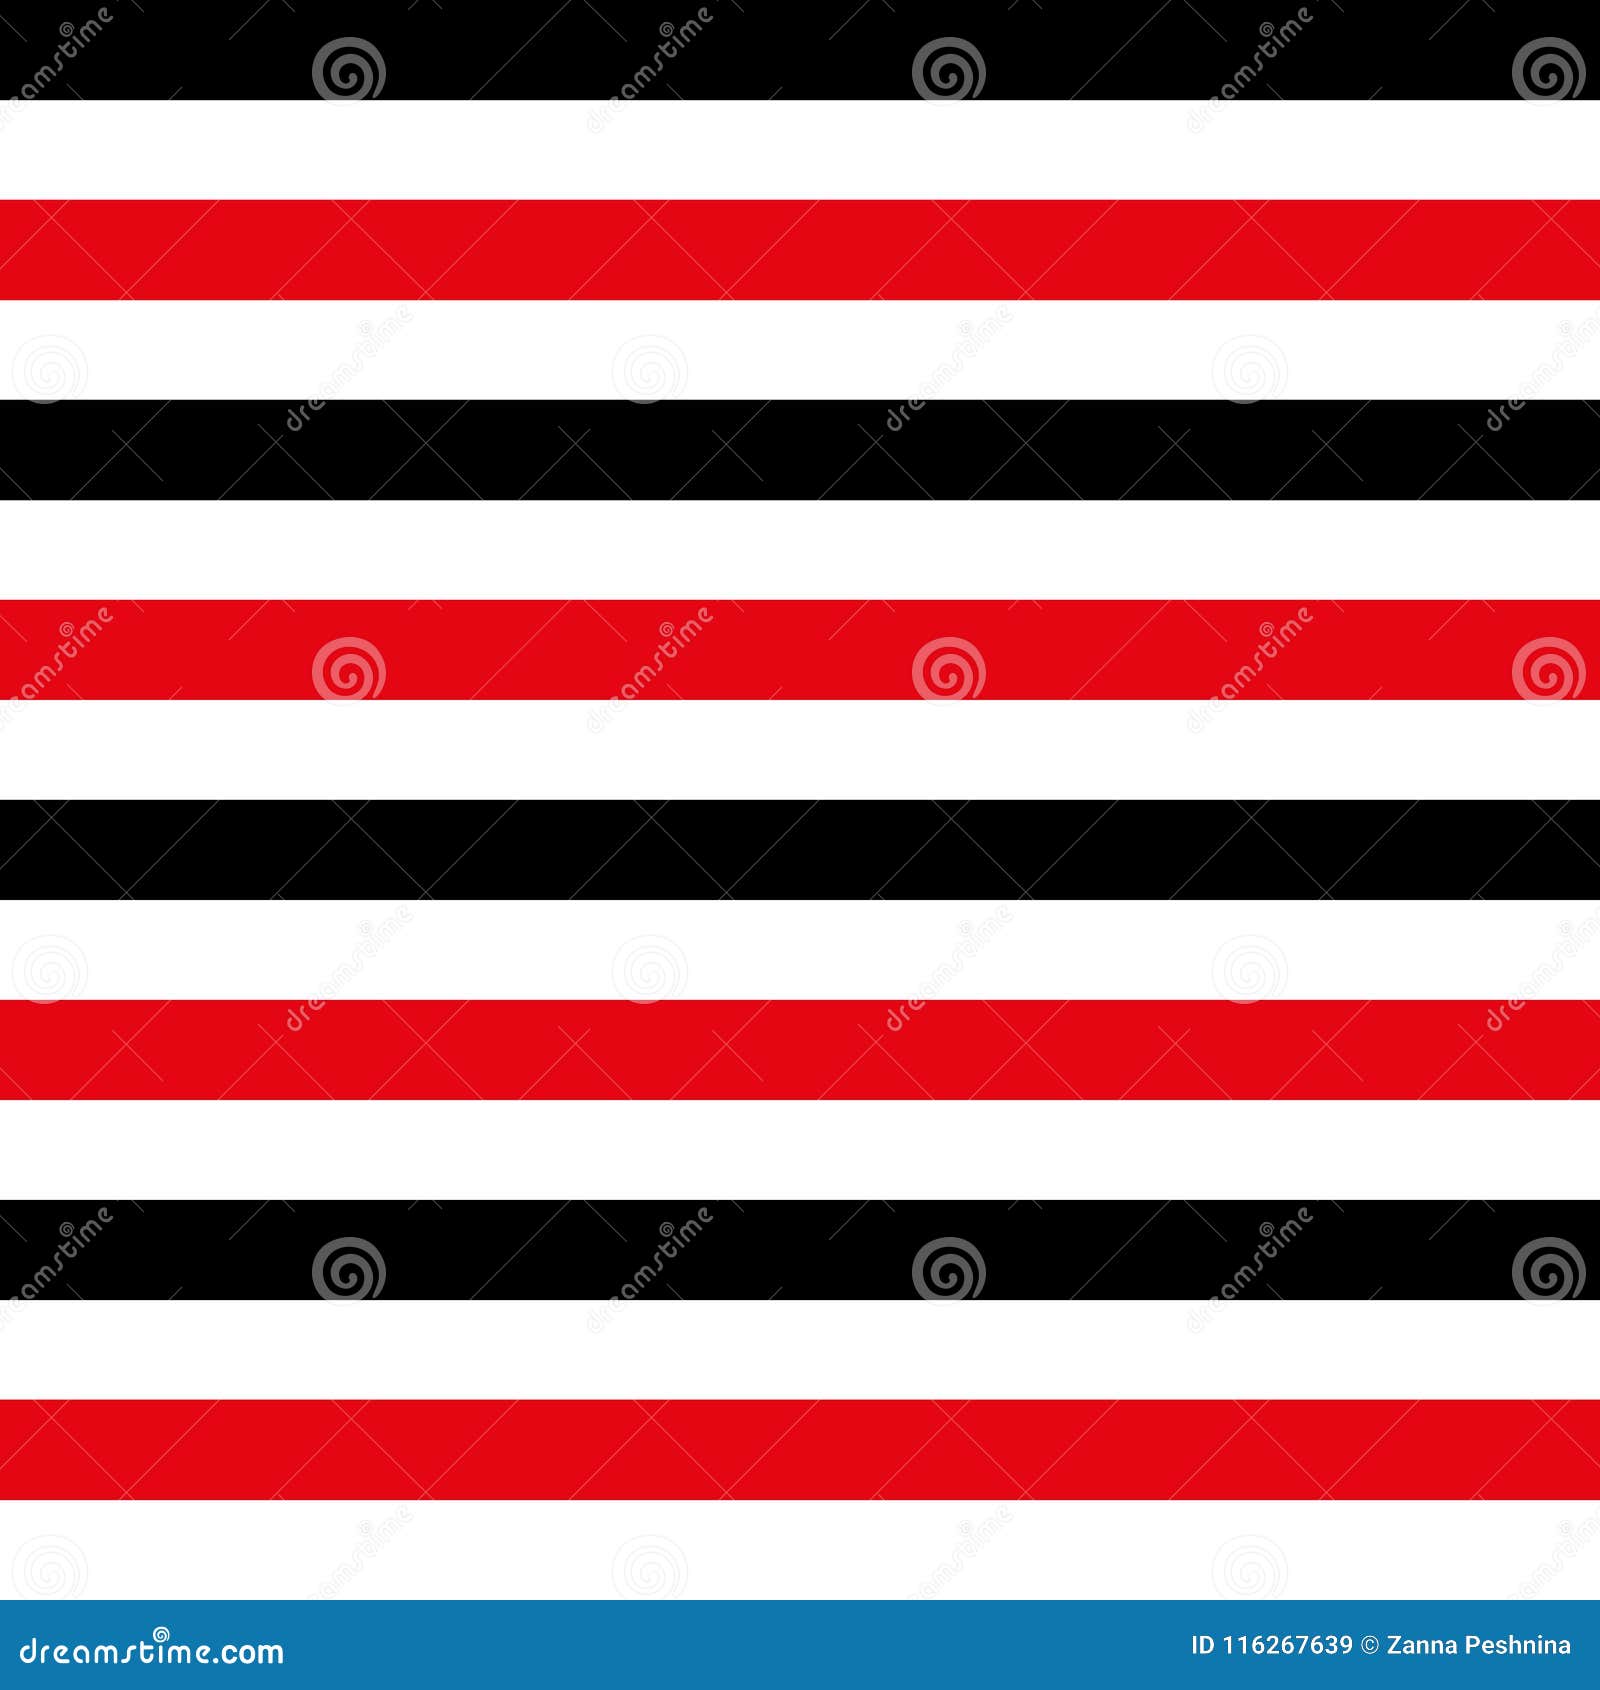 Abstract Seamless Geometric Horizontal Striped Pattern with Red, Black and White  Stripes. Vector Illustration Stock Vector - Illustration of card, marine:  116267639